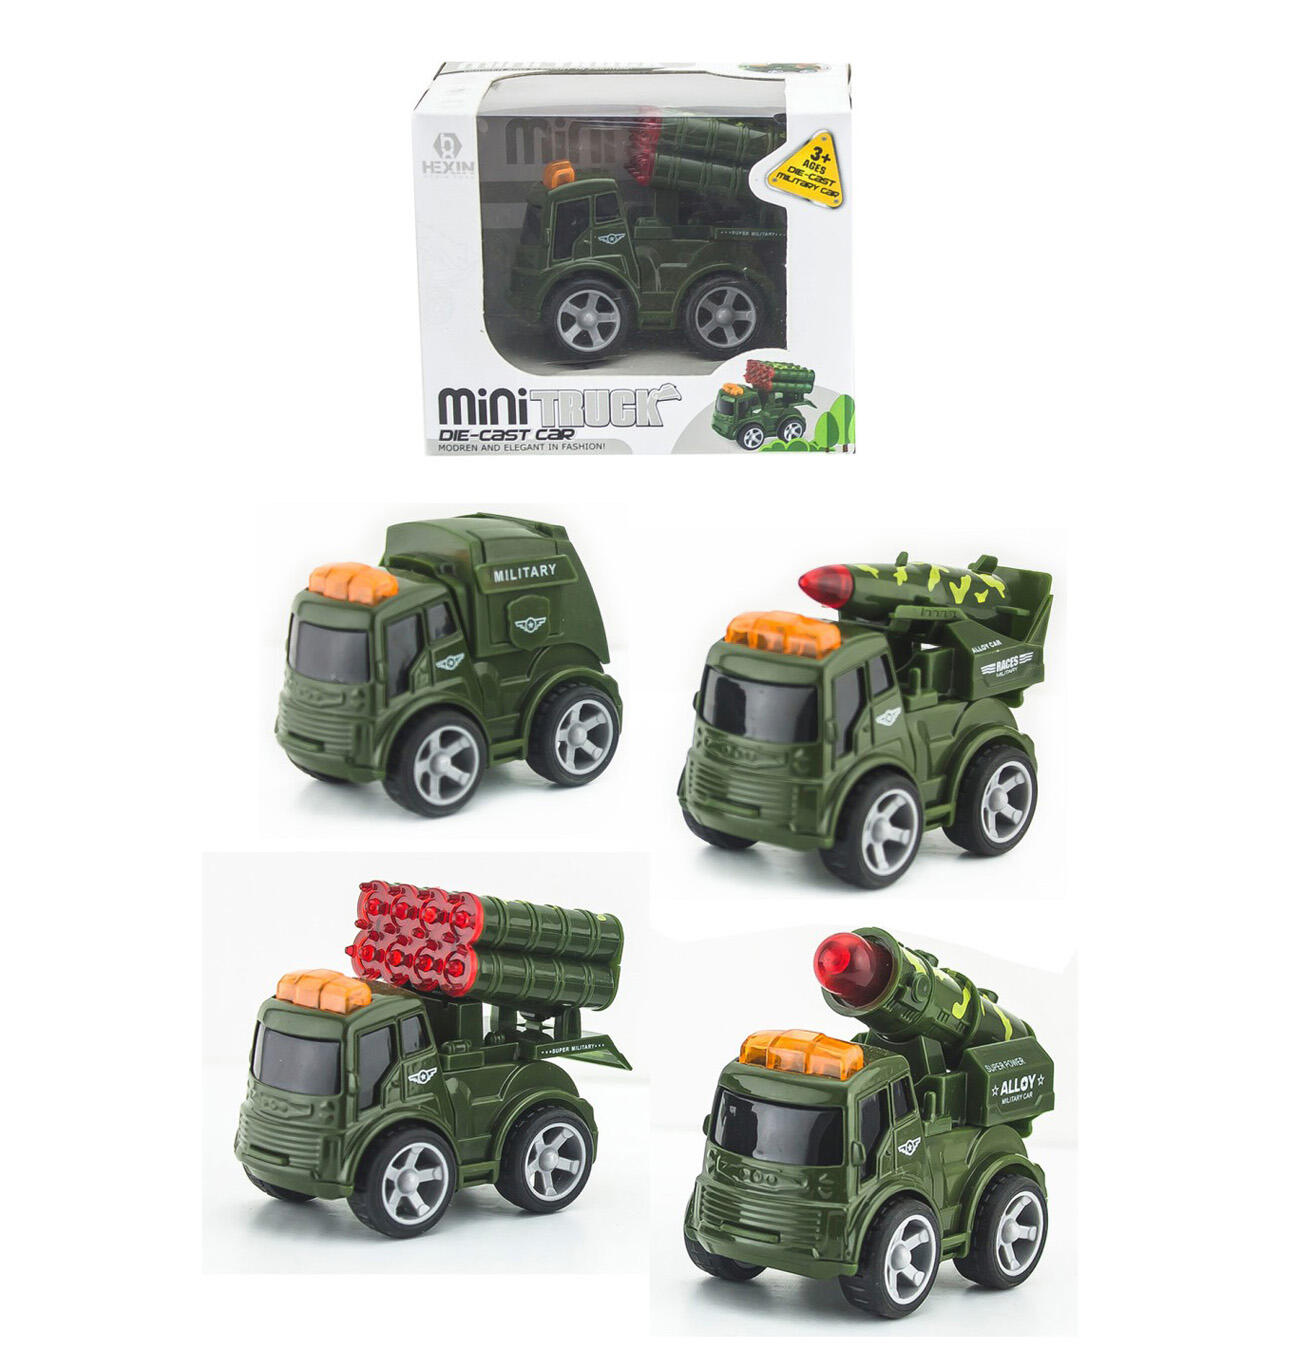 DIE-CAST FRICTION MILITARY